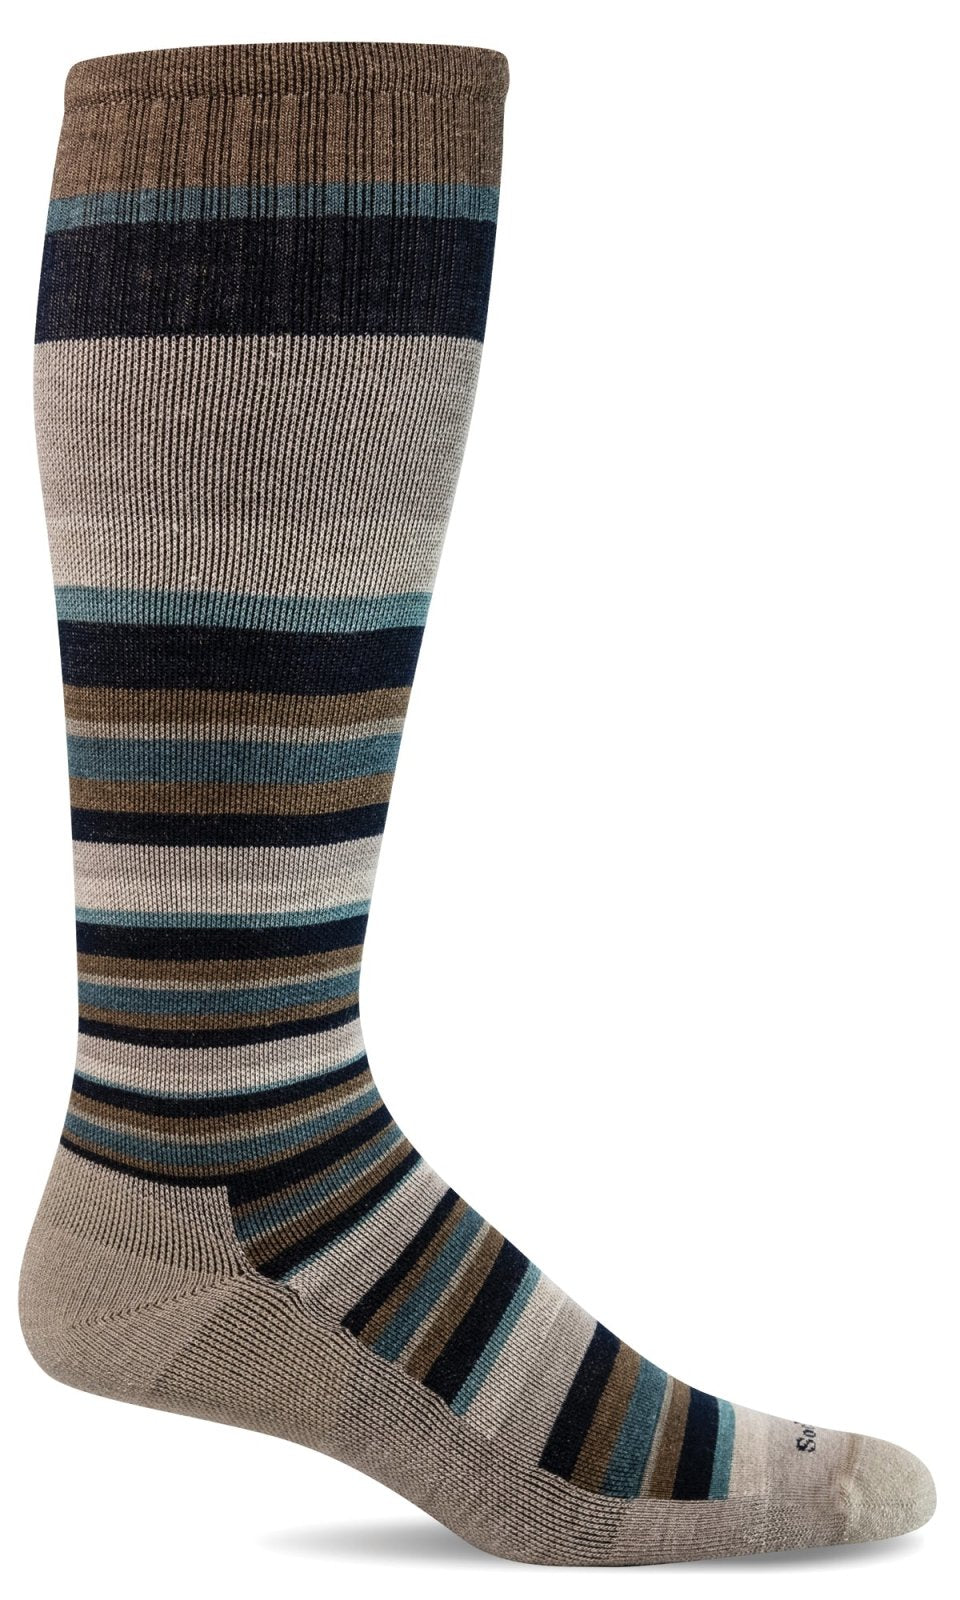 Men's Up Lift | Firm Graduated Compression Socks - Merino Wool Lifestyle Compression - Sockwell